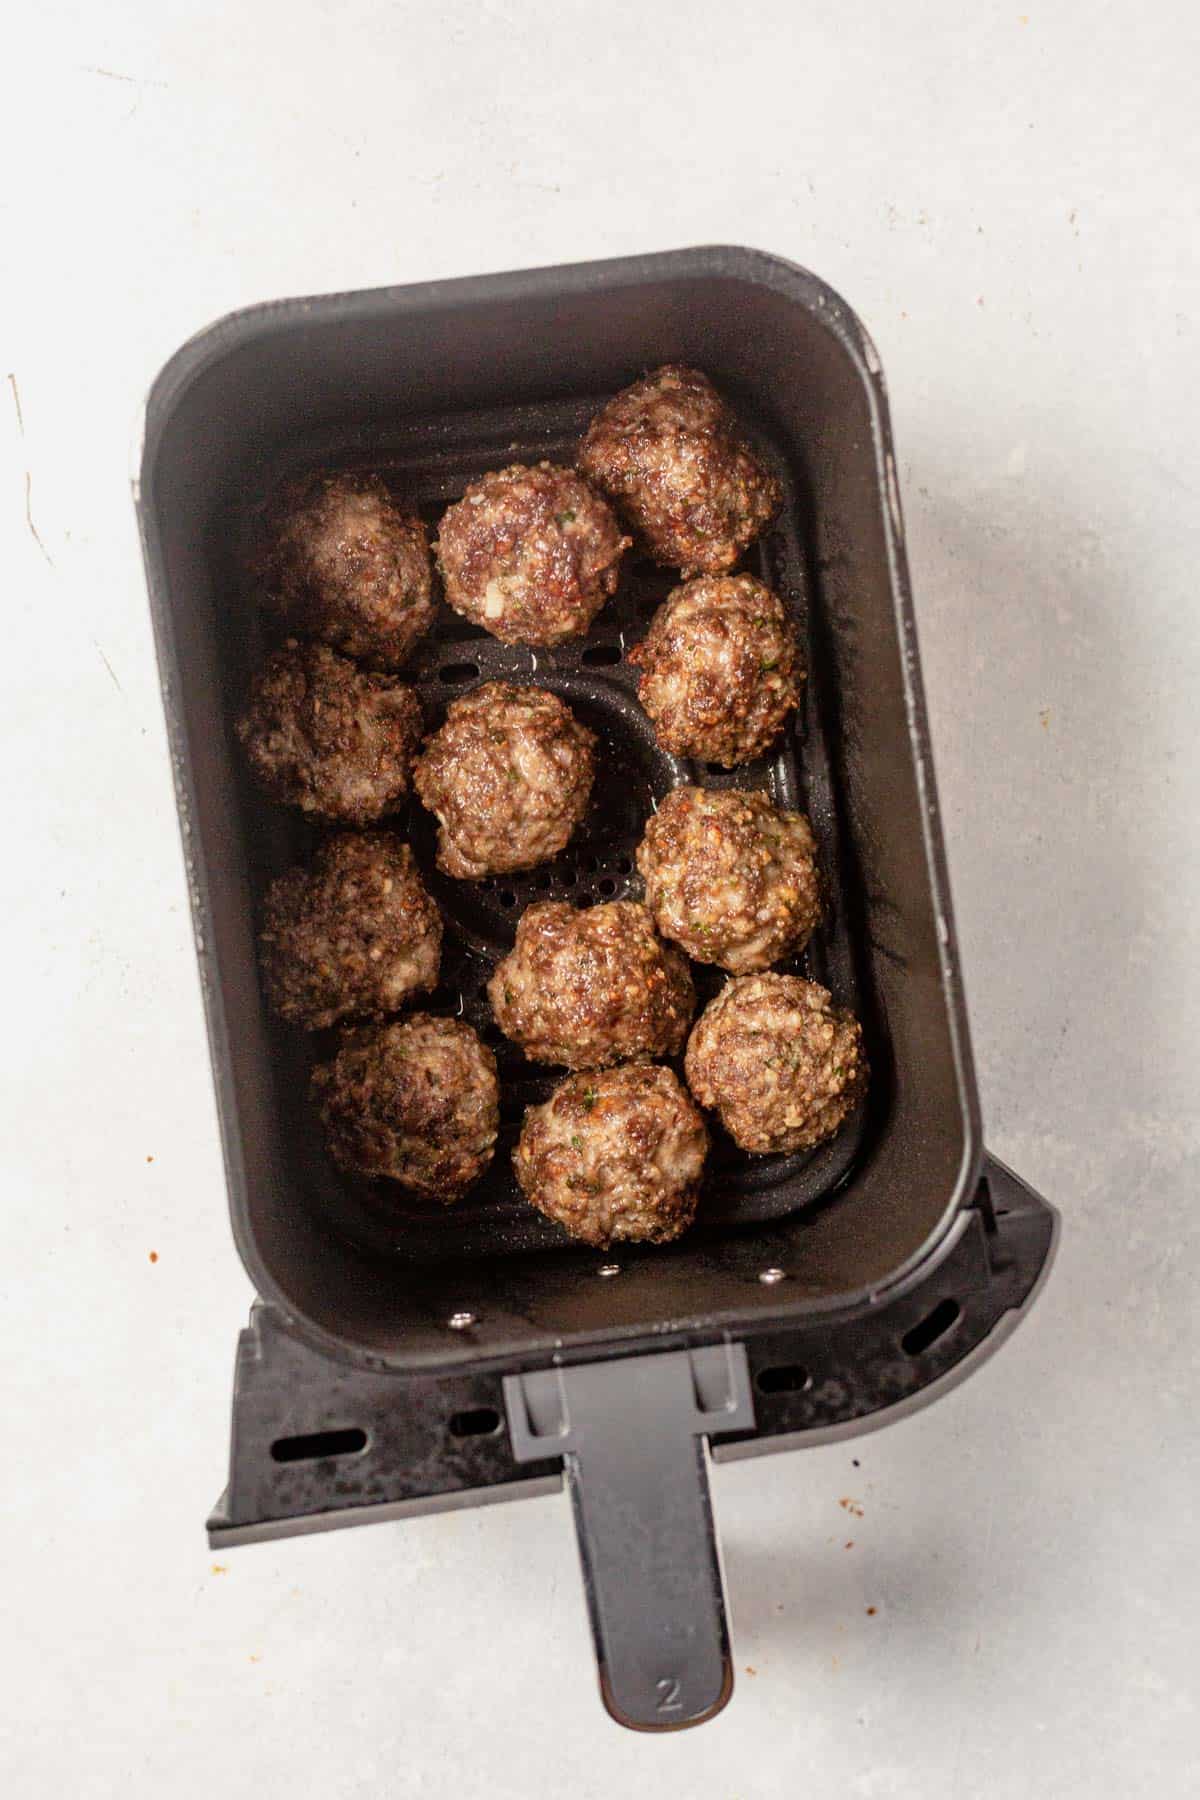 cooked meatballs in the air fryer basket